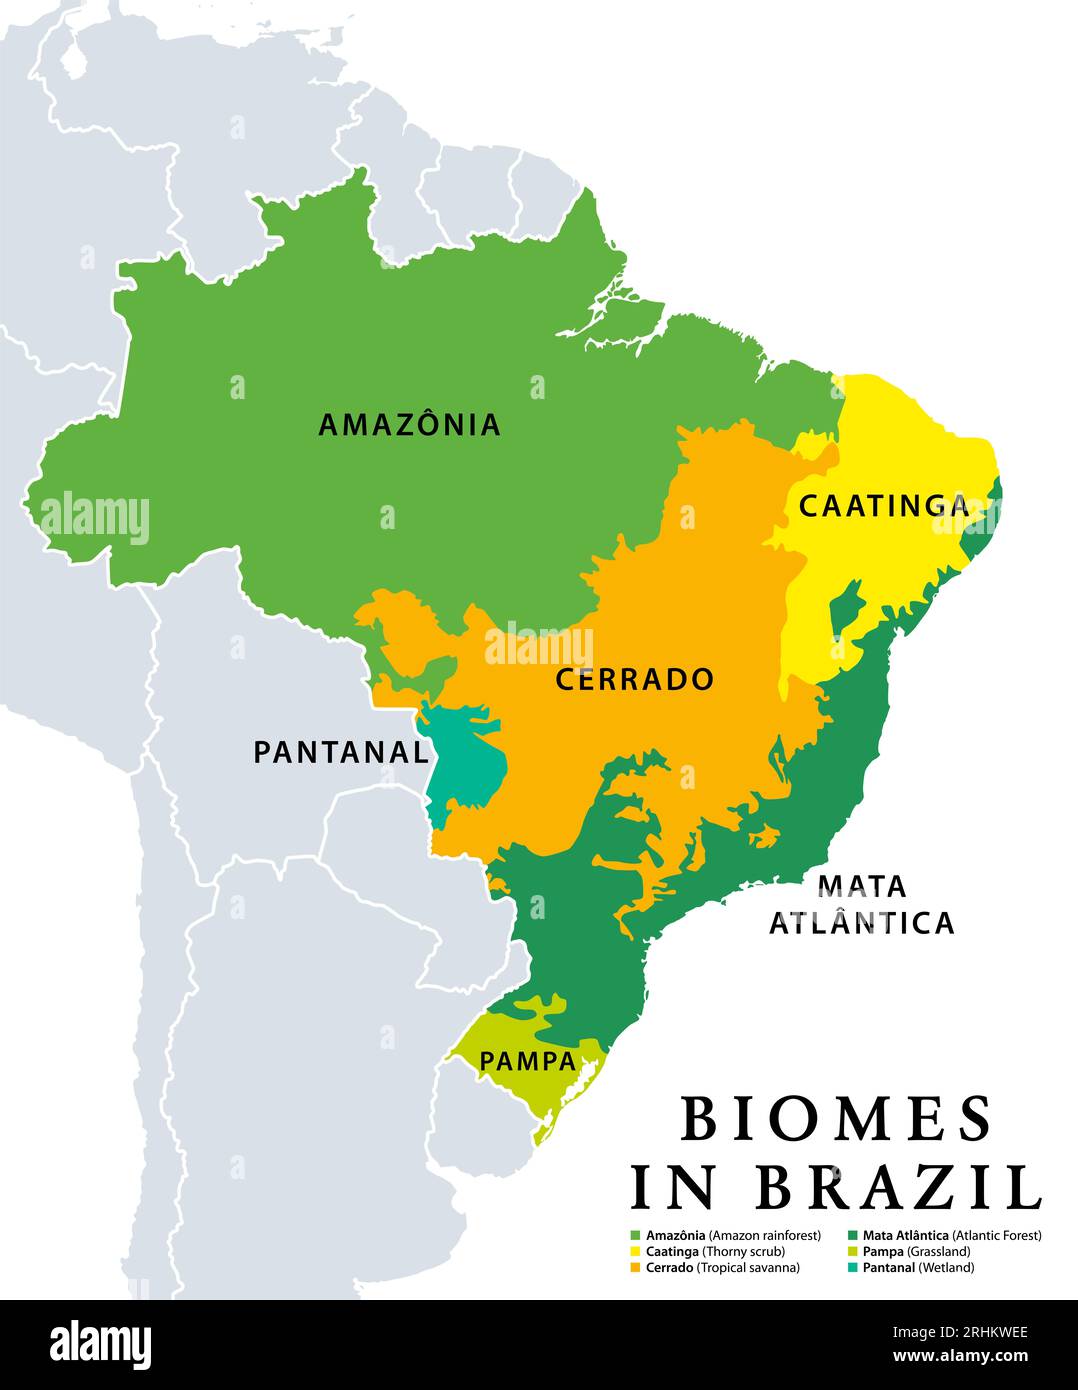 Biomes in Brazil, map of ecosystems with natural vegetation. Amazon rainforest, thorny scrub, tropical savanna, Atlantic Forest, rassland and wetland. Stock Photo